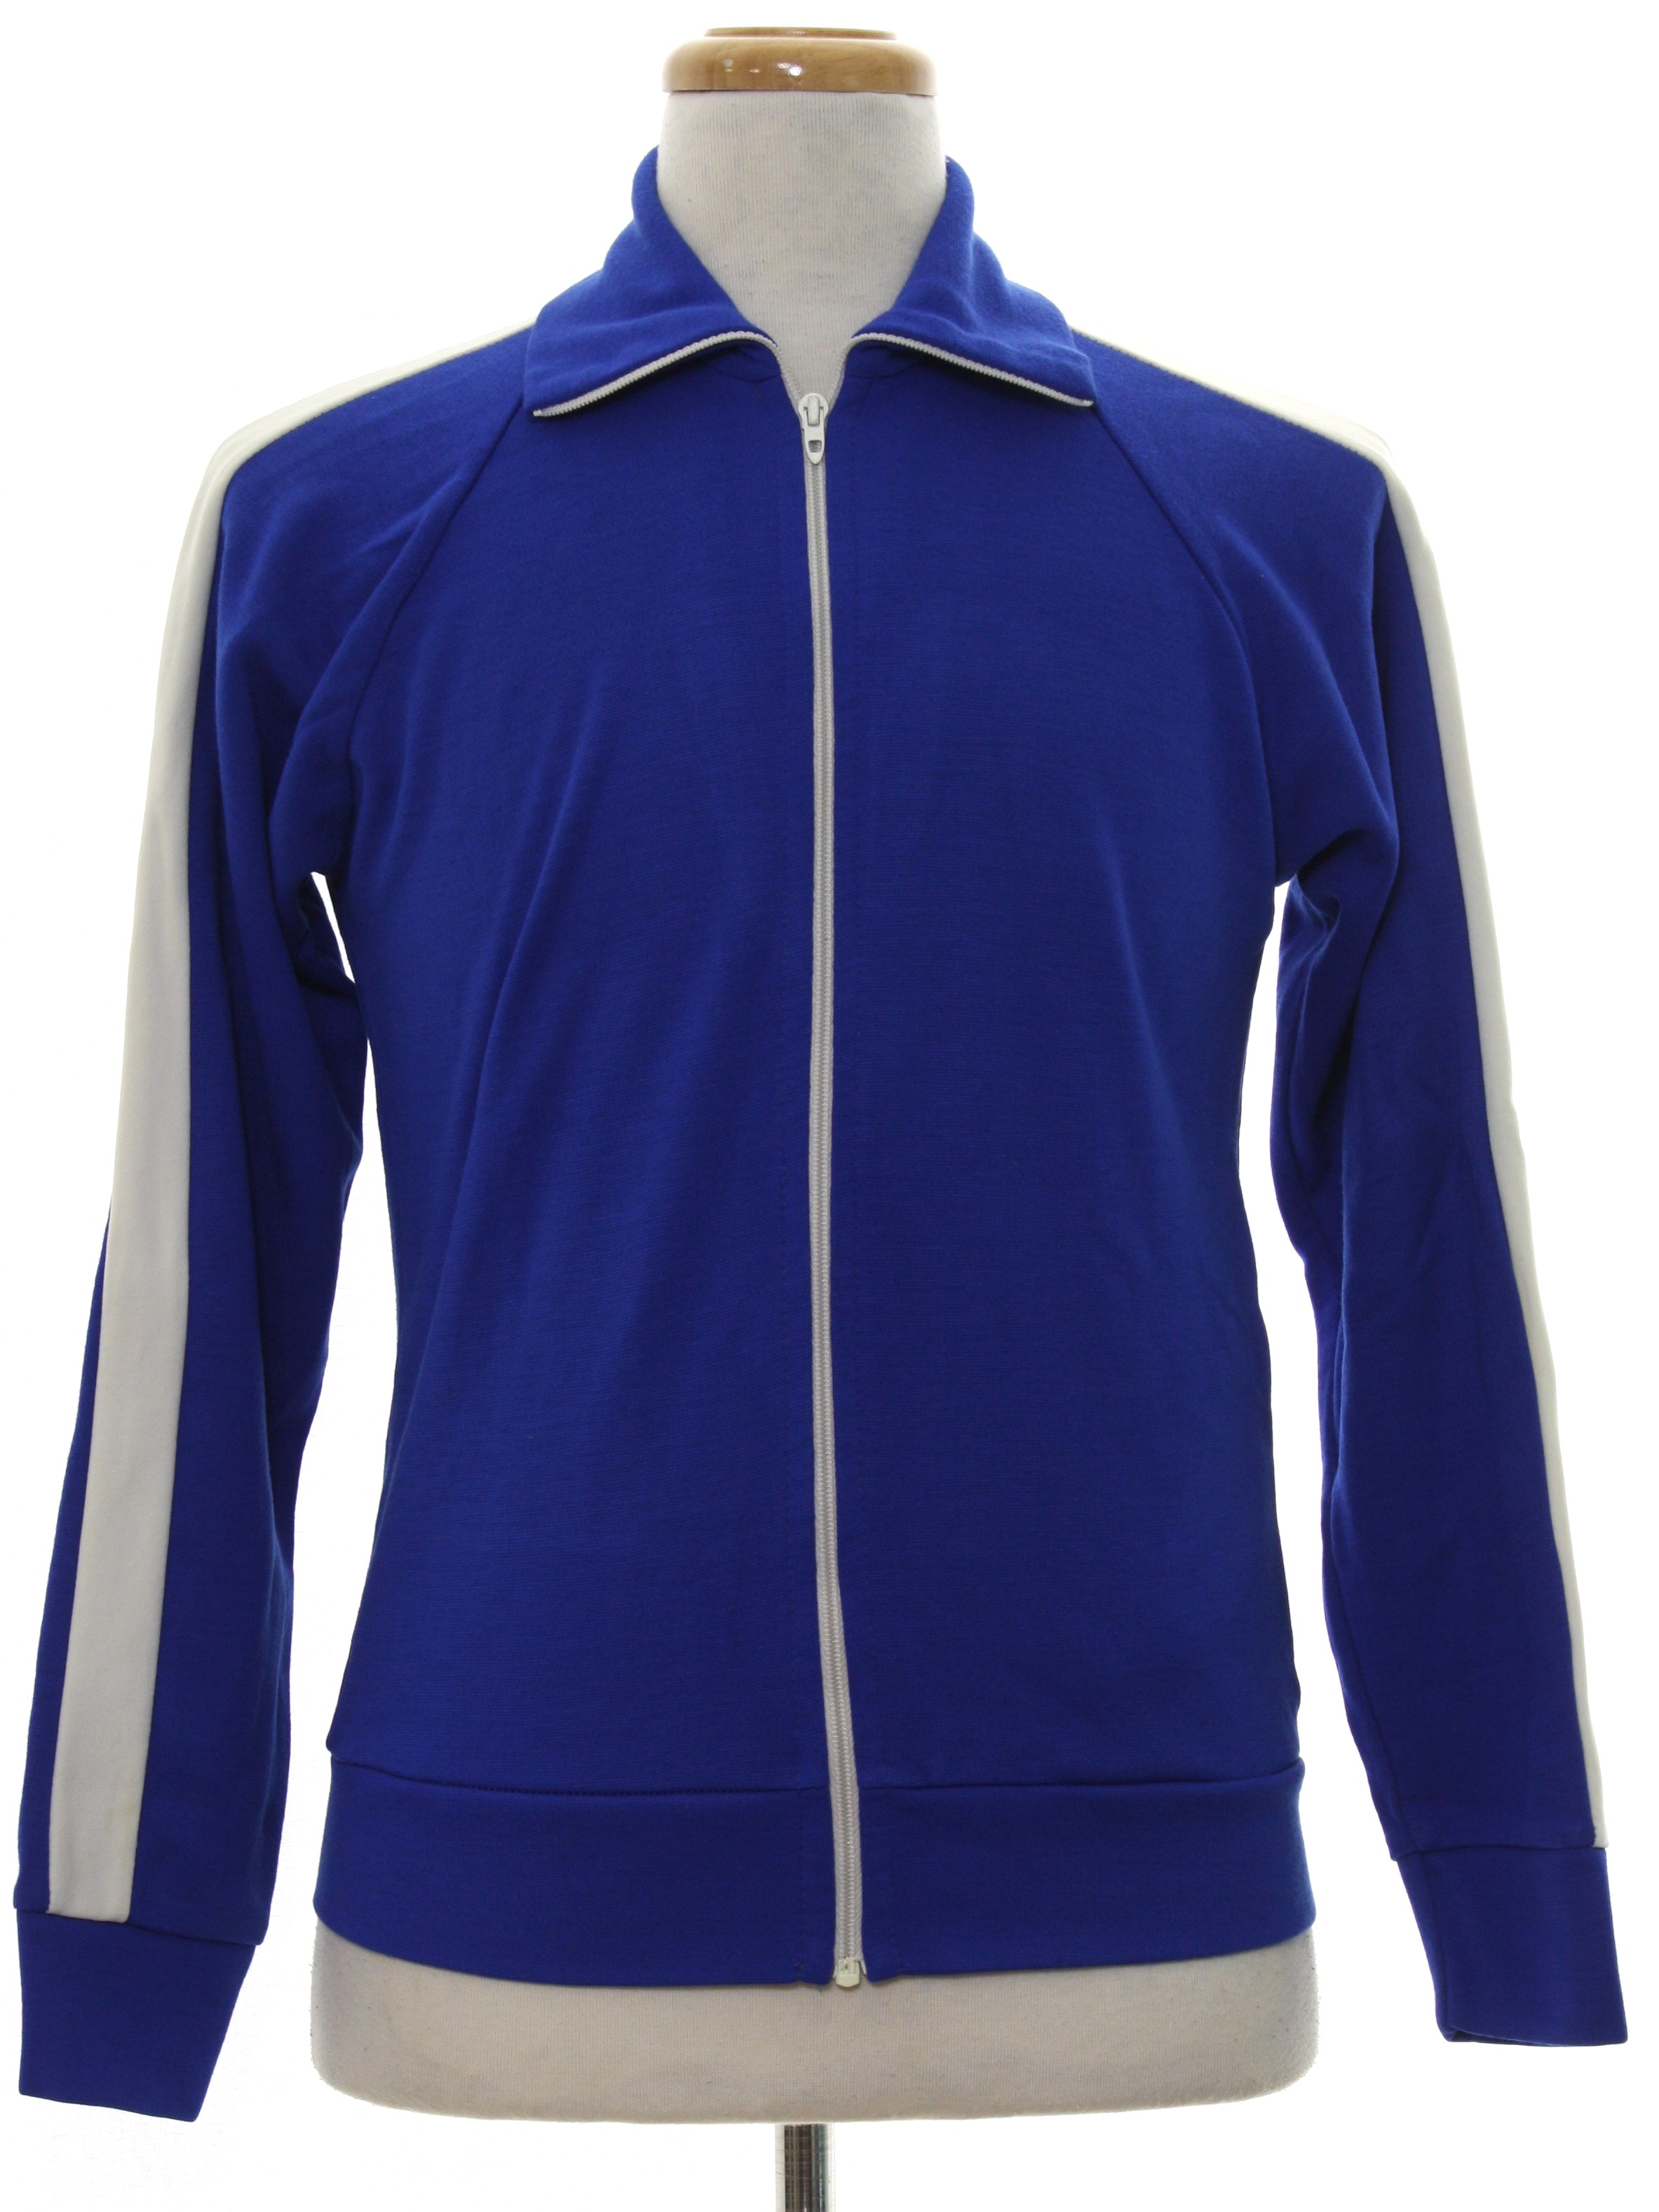 1970's Retro Jacket: 70s -Sport Casuals- Mens royal blue background ...